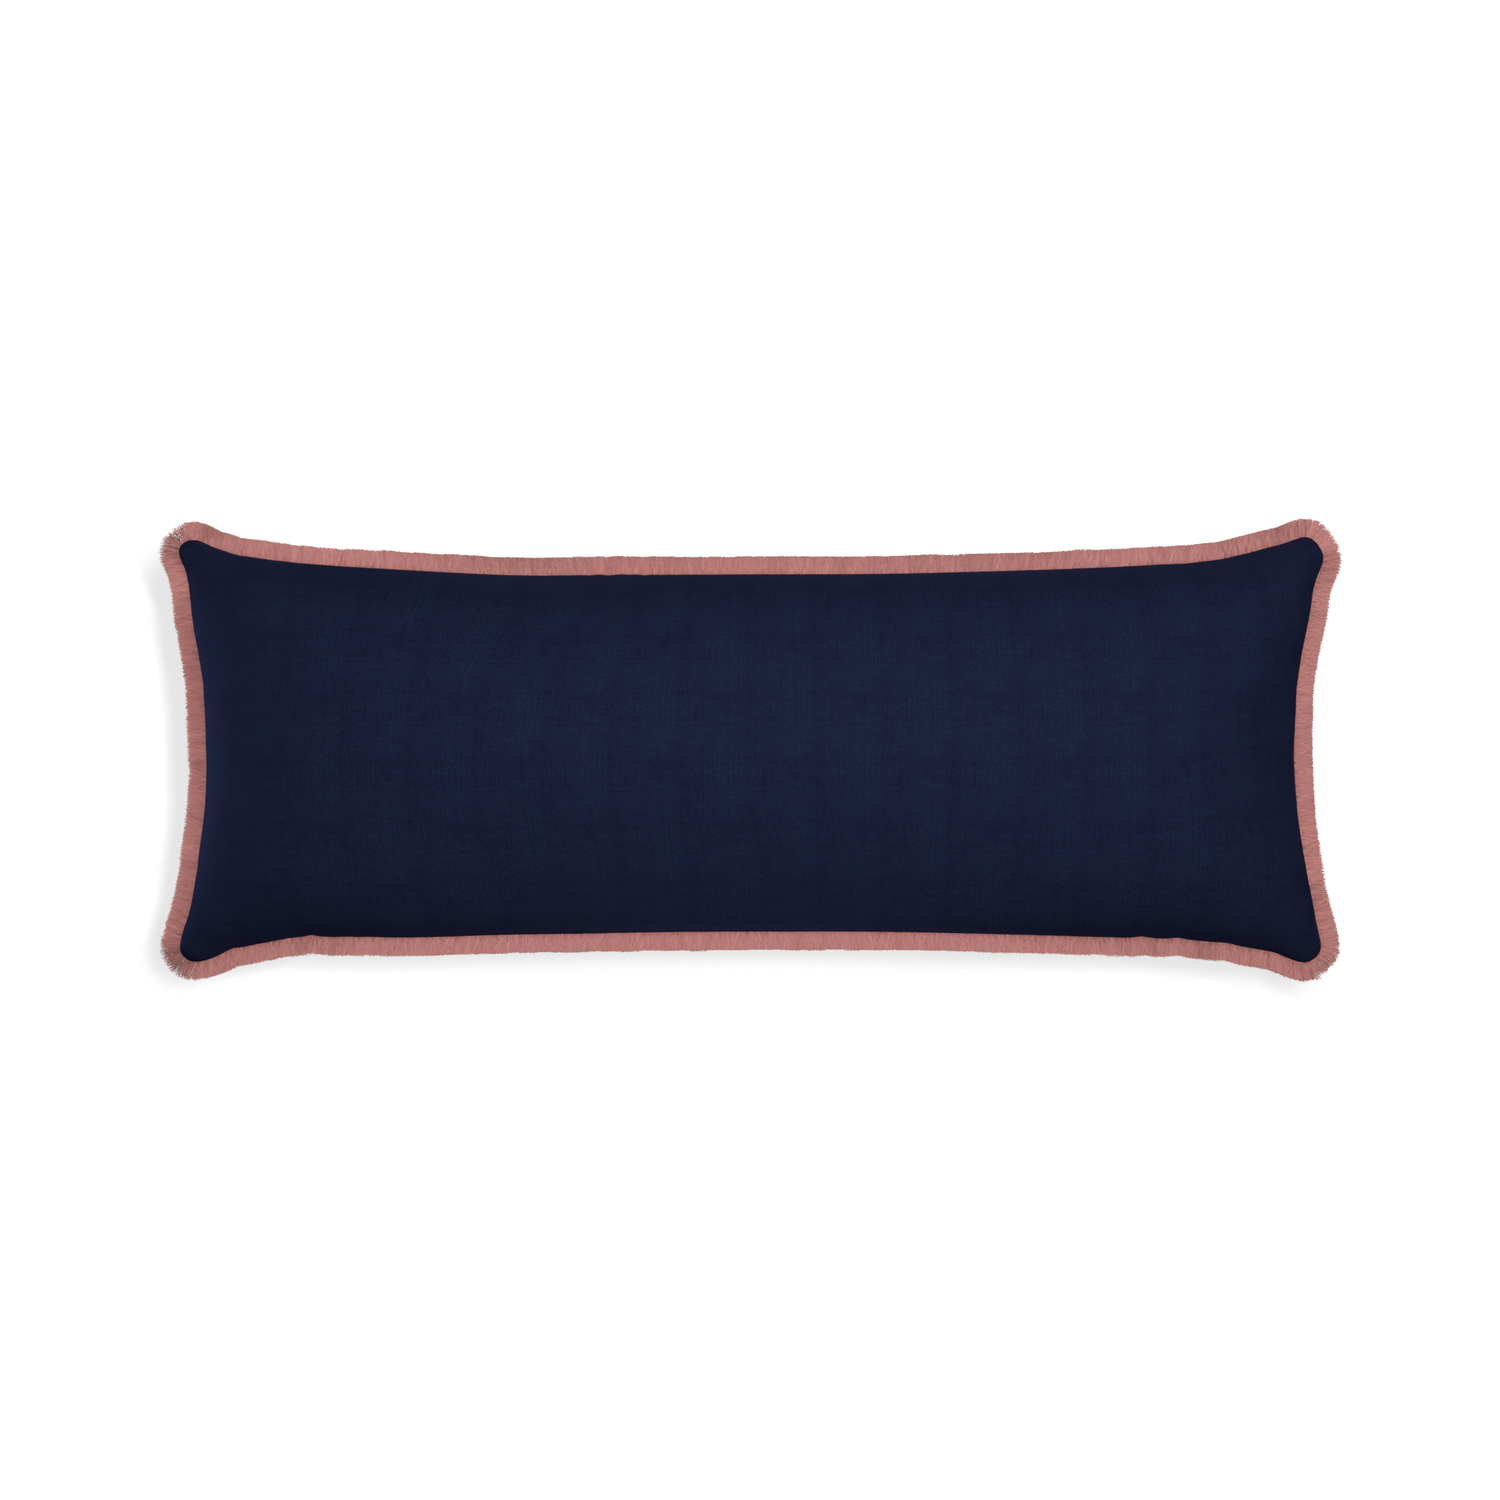 Xl-lumbar midnight custom pillow with d fringe on white background